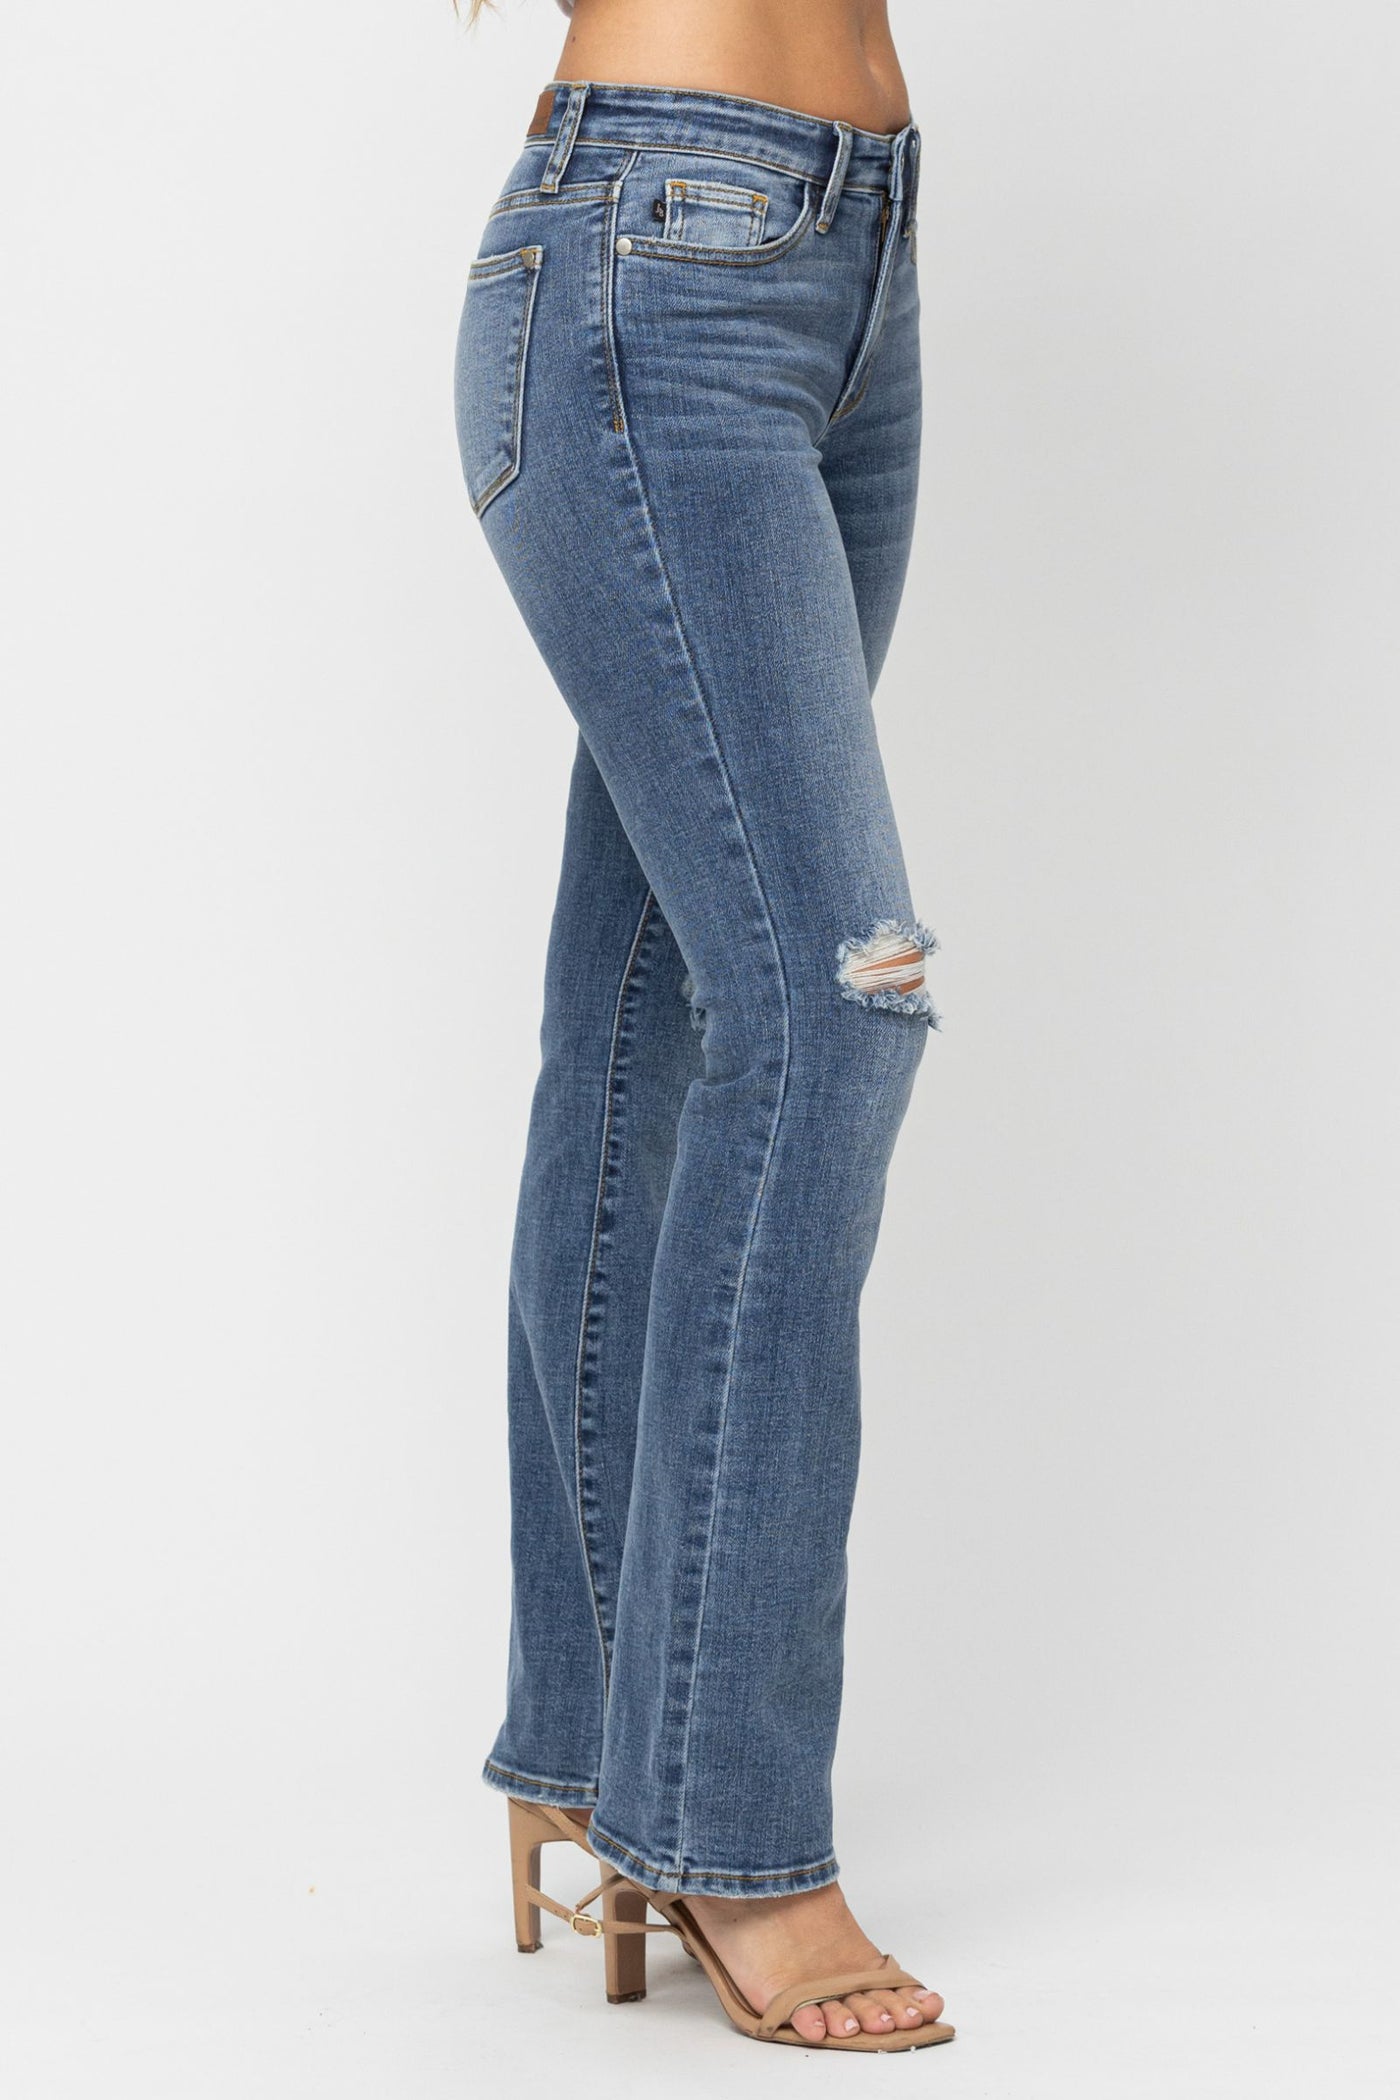 Judy Blue Mid Rise Boot Cut - Corinne Boutique Family Owned and Operated USA